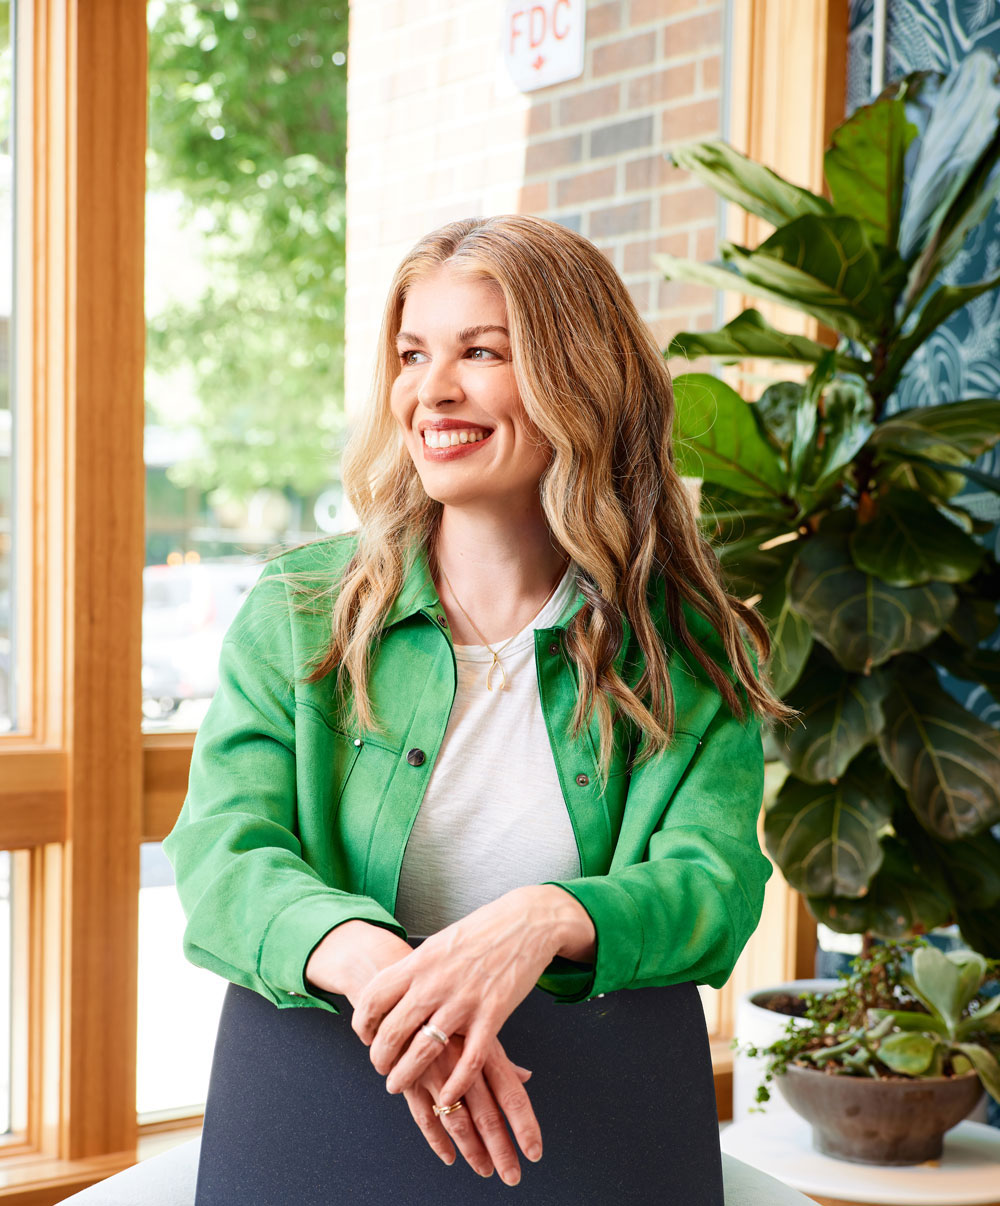 Meghan Kelly, Co-founder and CEO, wearing a green jacket, smiles and looks to the left